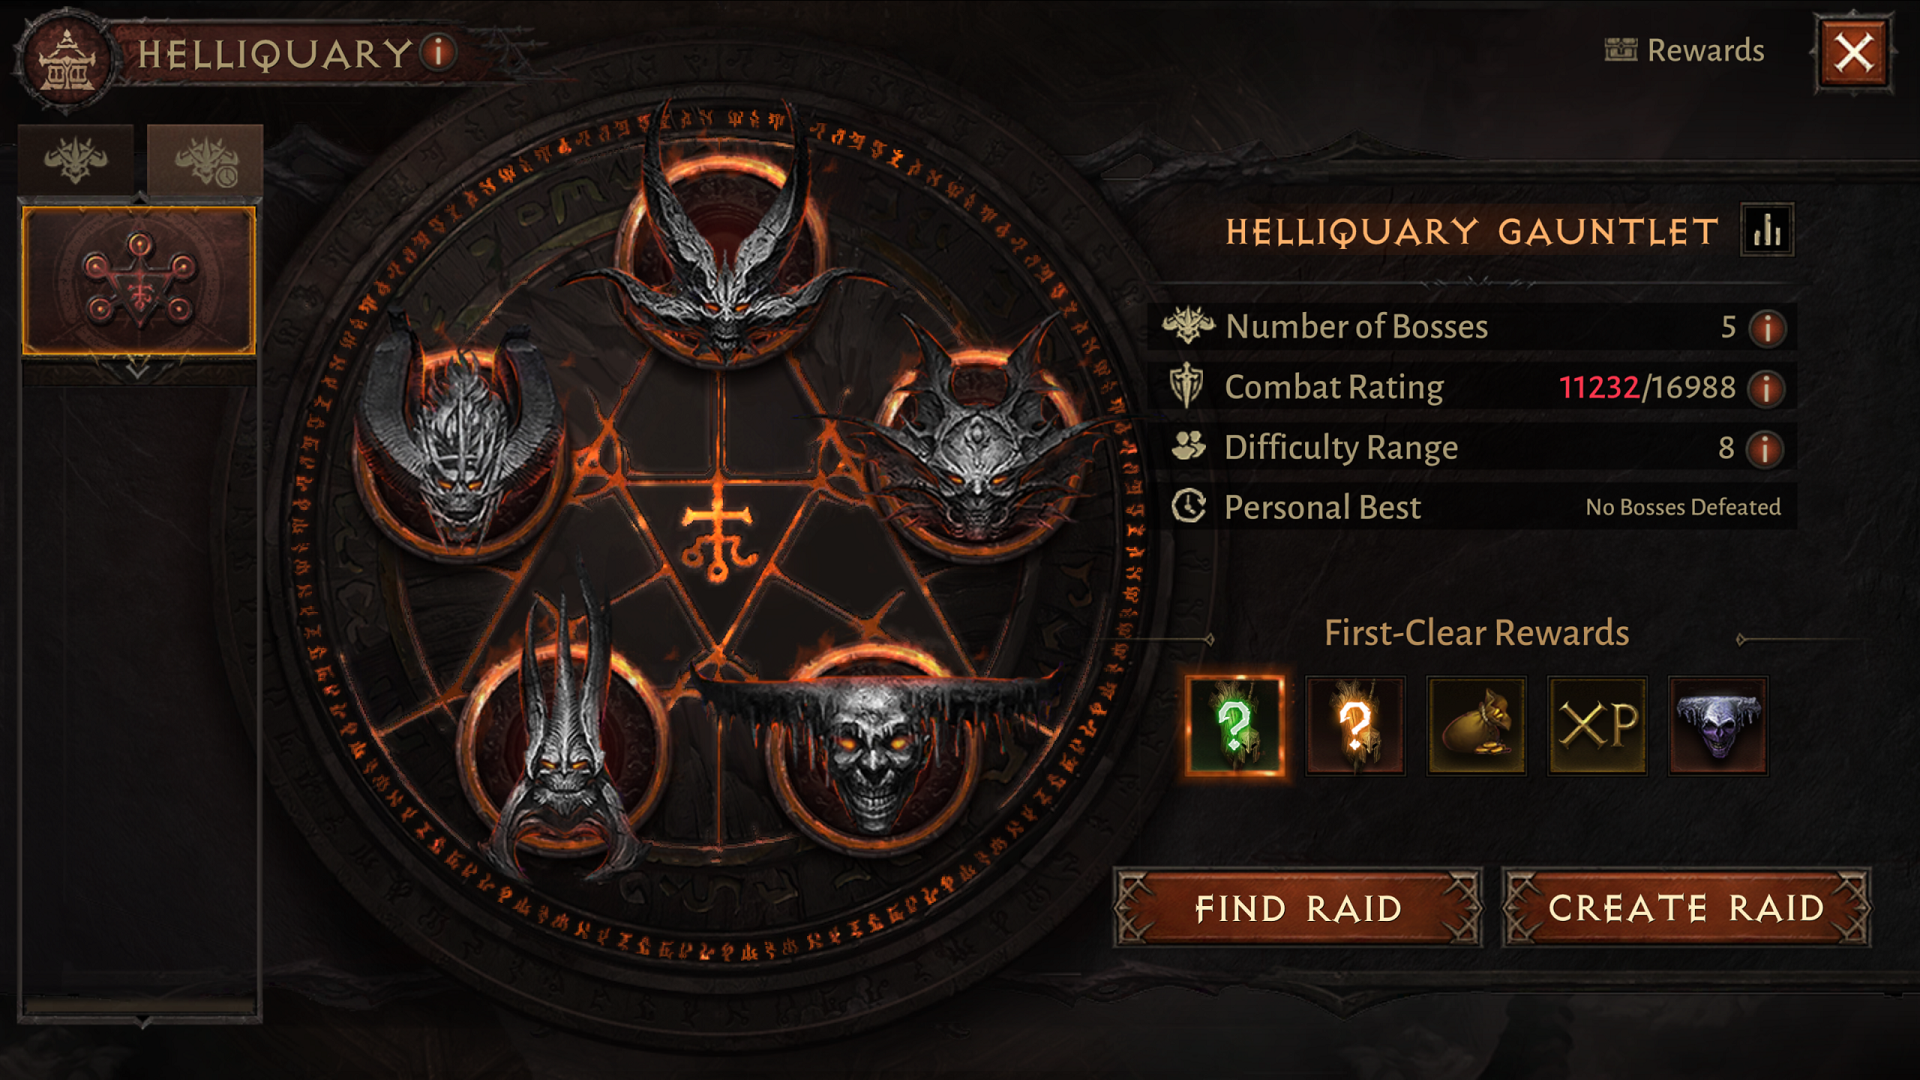 New update to Diablo Immortal brings new content and Battle Pass